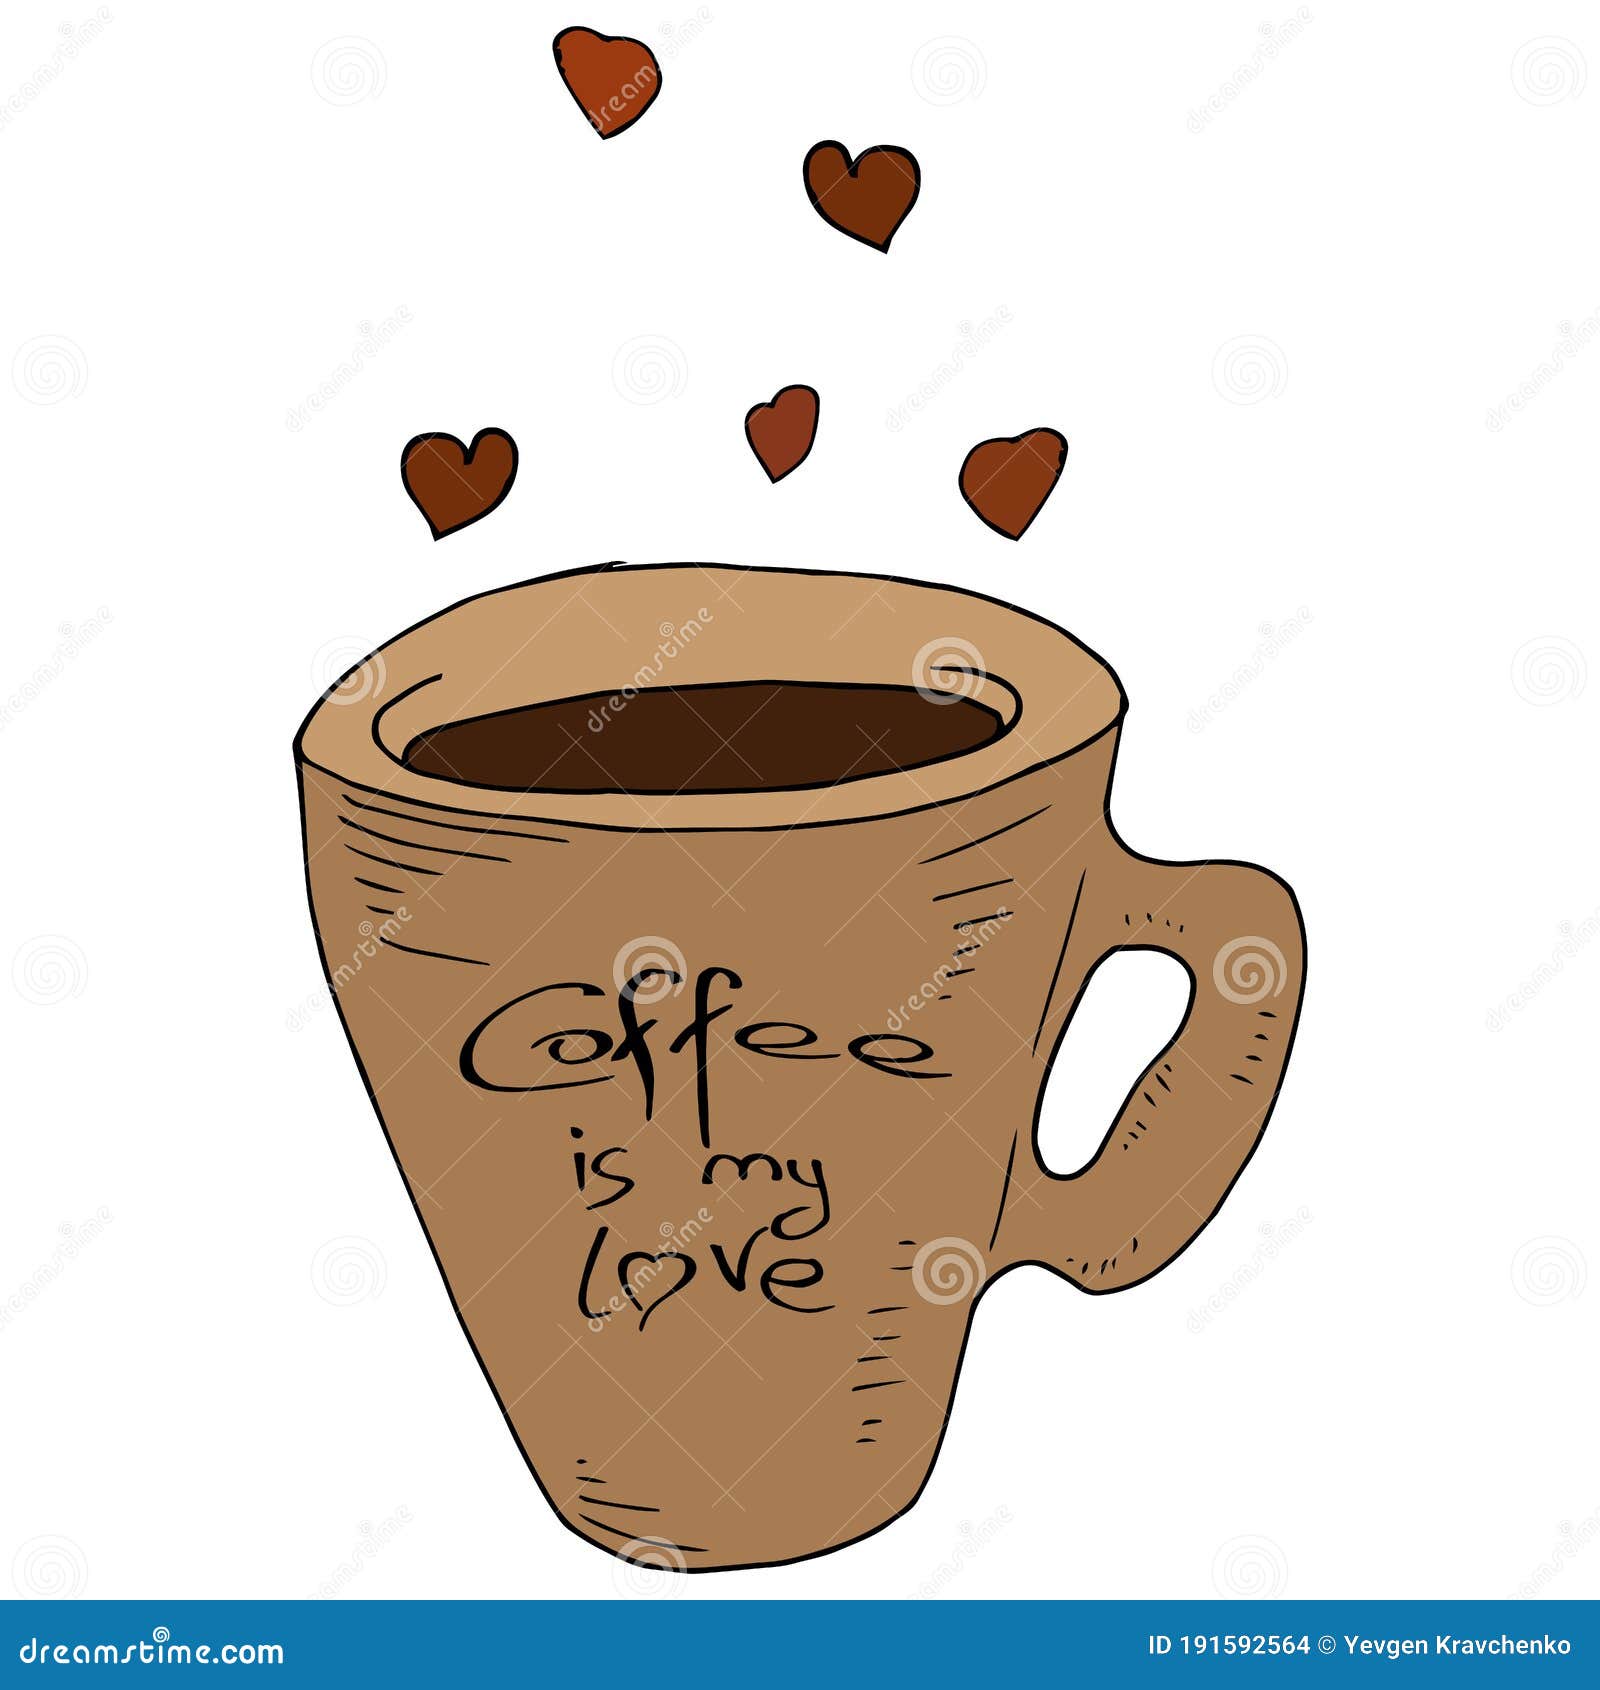 https://thumbs.dreamstime.com/z/cup-coffee-hearts-rise-above-mug-lettering-inscription-my-love-calligraphy-hand-drawn-valentine-s-day-191592564.jpg